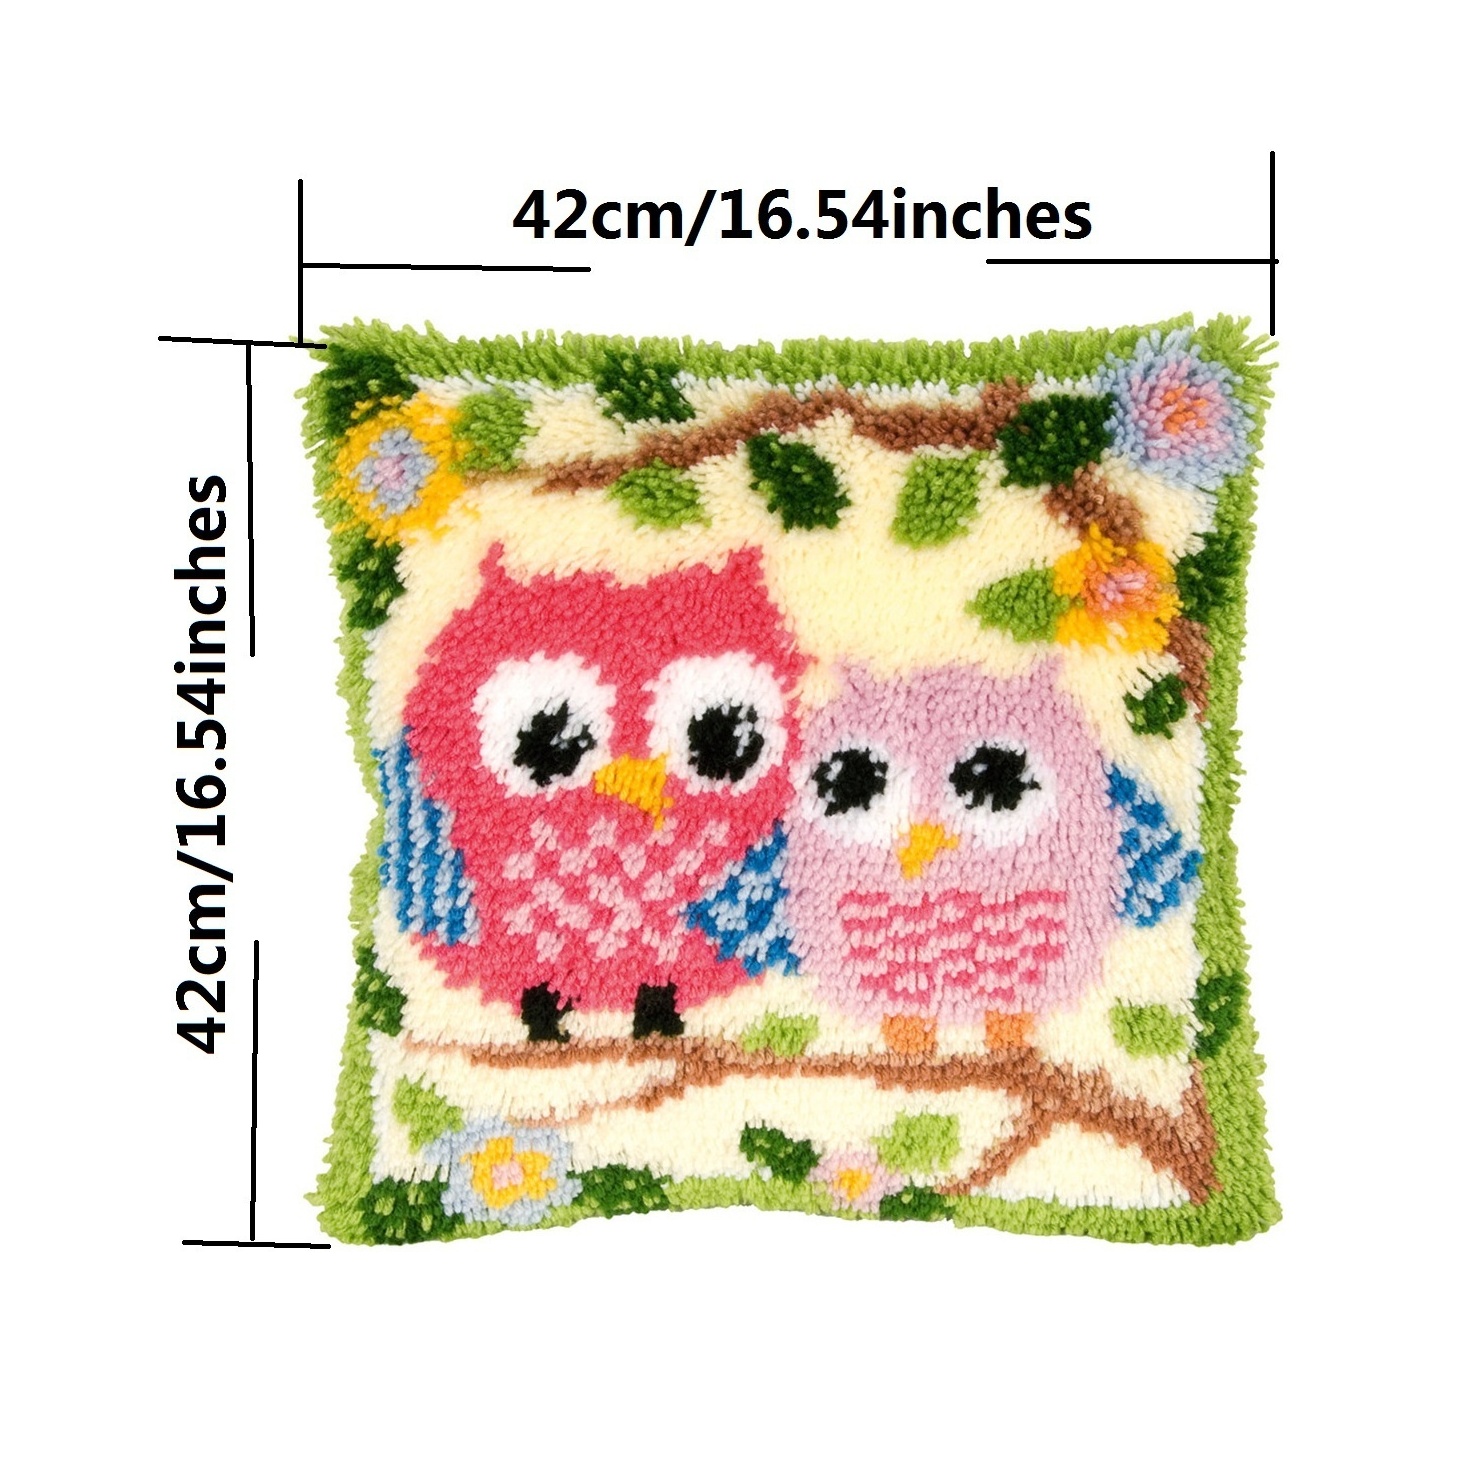 EMISTEM Latch Hook Kits for Adults - Latch Hook Pillow Kits, Crochet Yarn Kit for Beginners, DIY Needlework Crafts Cover Case with Printed Canvas